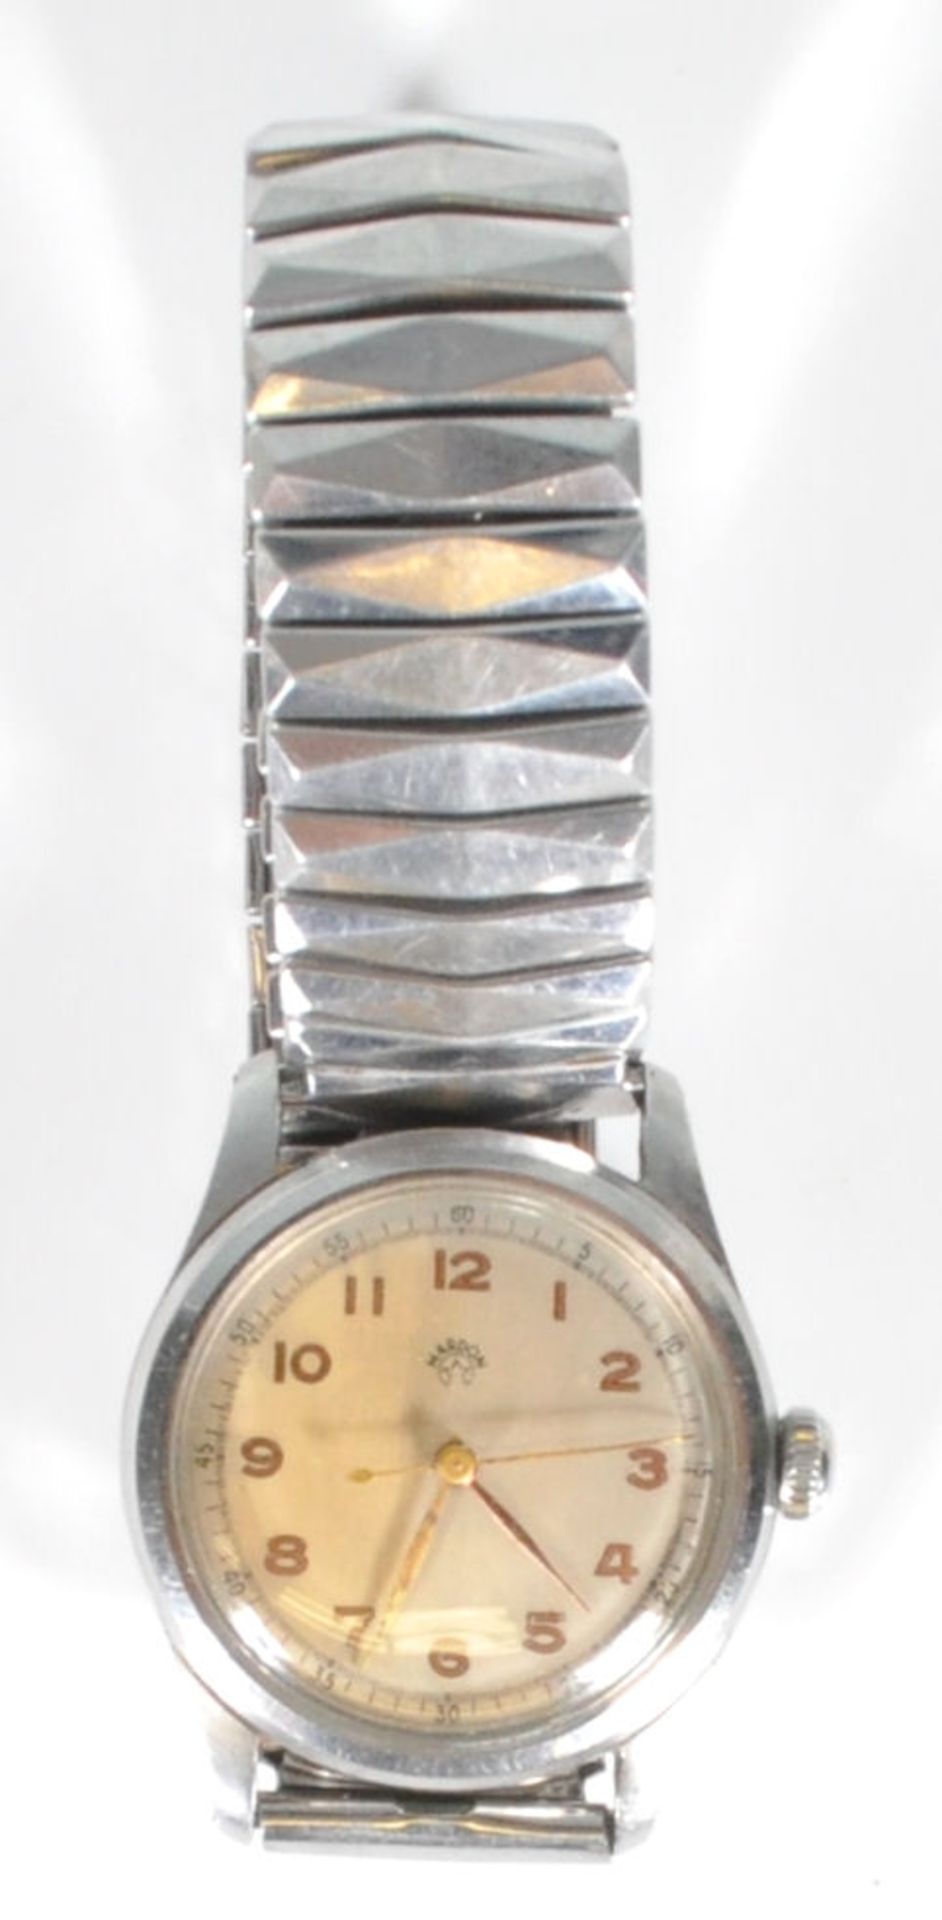 A vintage stainless steel gentleman's wrist watch having a champagne dial with Arabic numeral